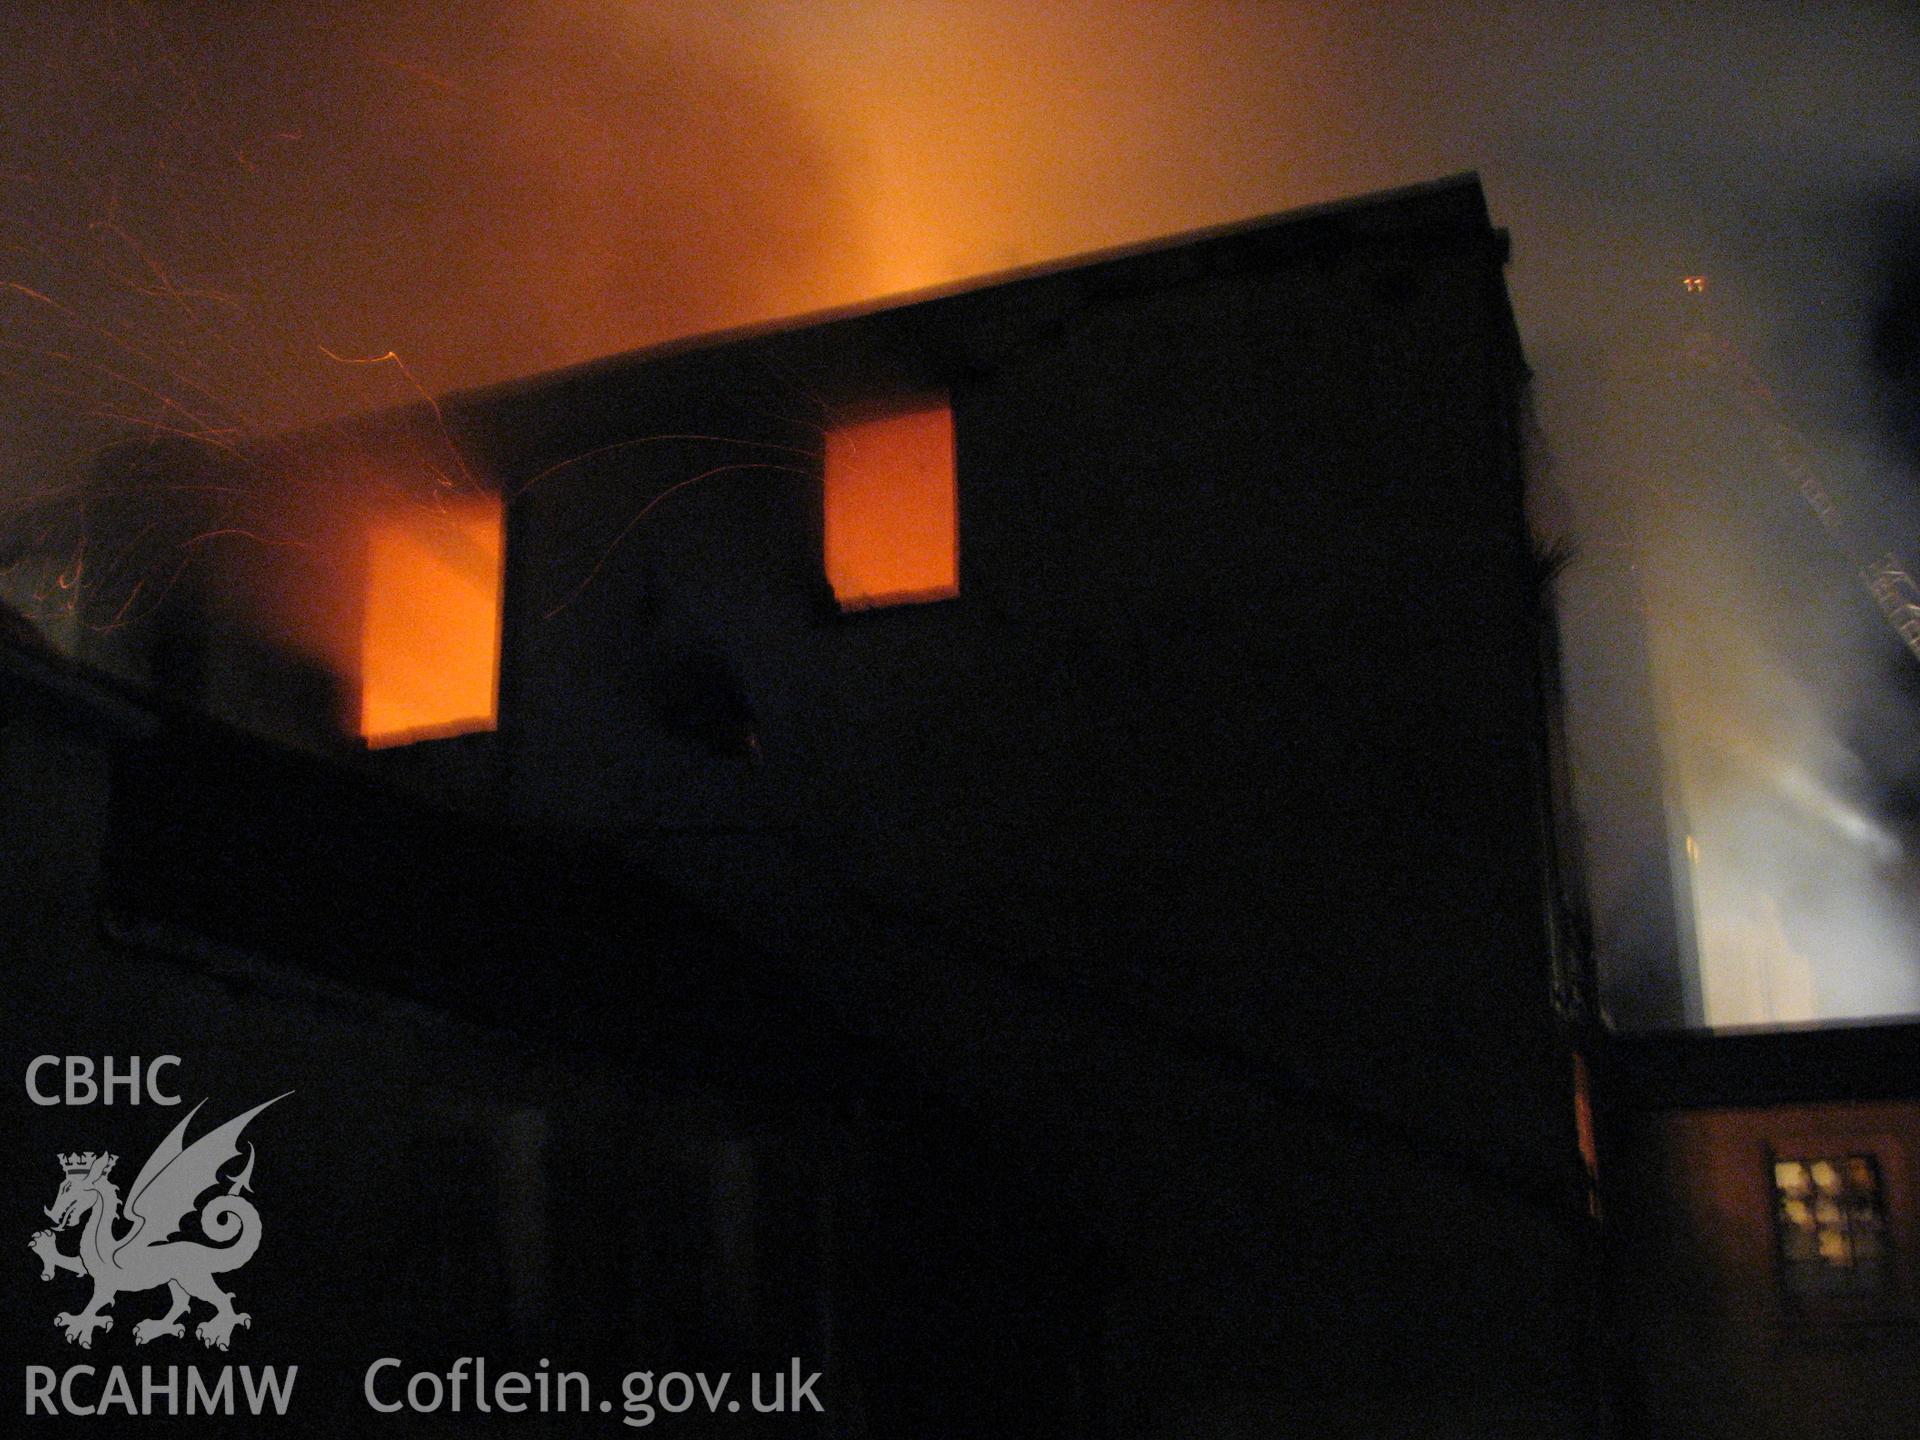 Colour digital photograph of The Royal Gatehouse Hotel, on fire.